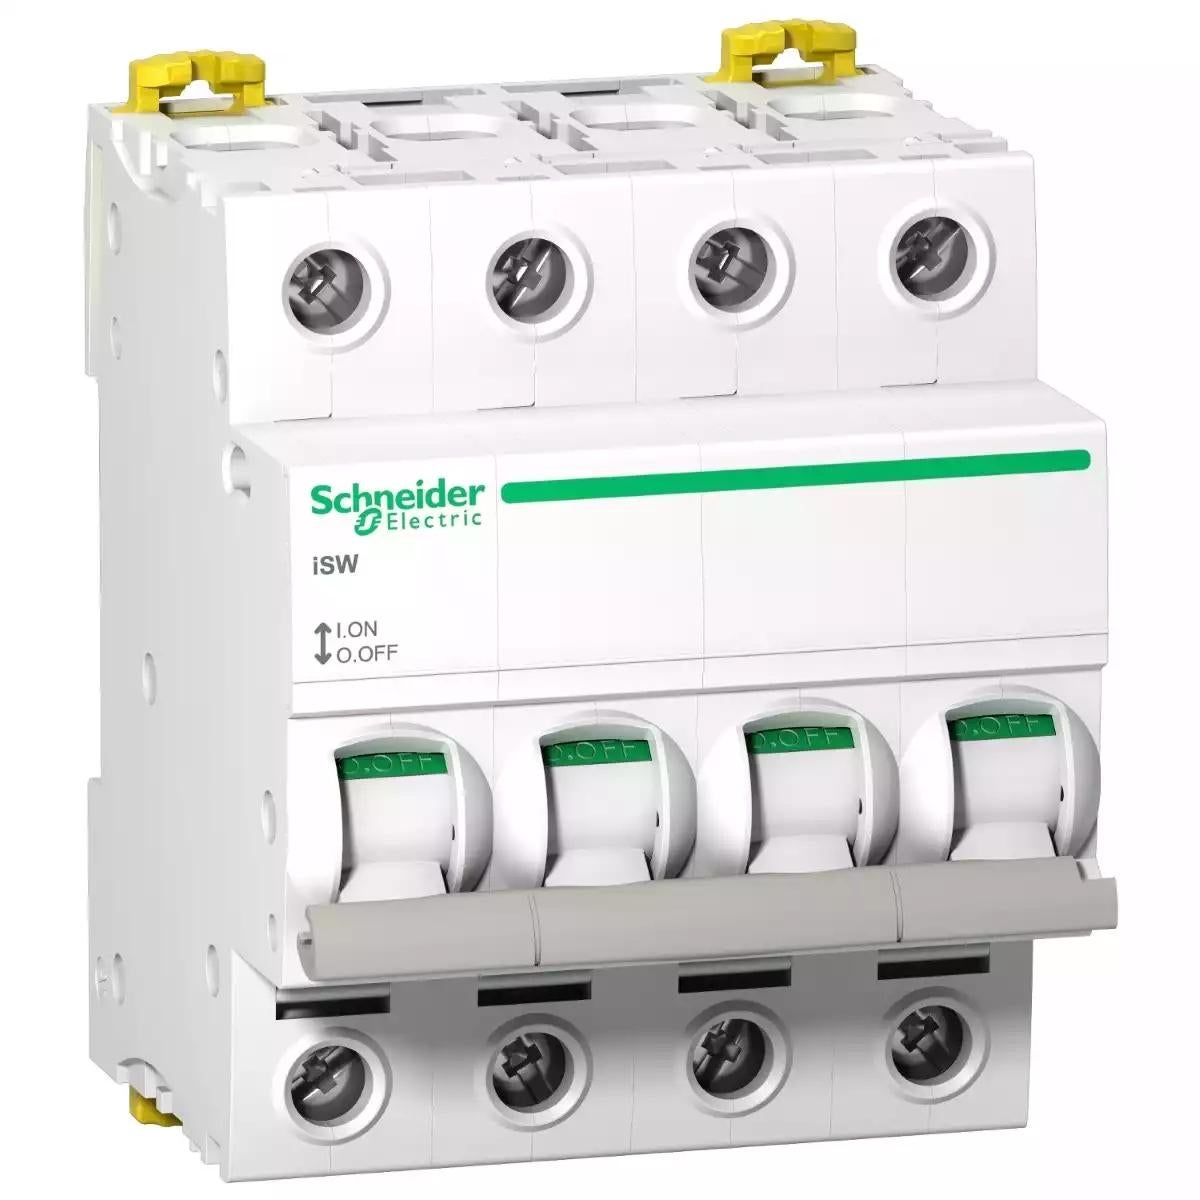 Schneider Electric Acti 9 iSW - 4P - 40 A - 415 V